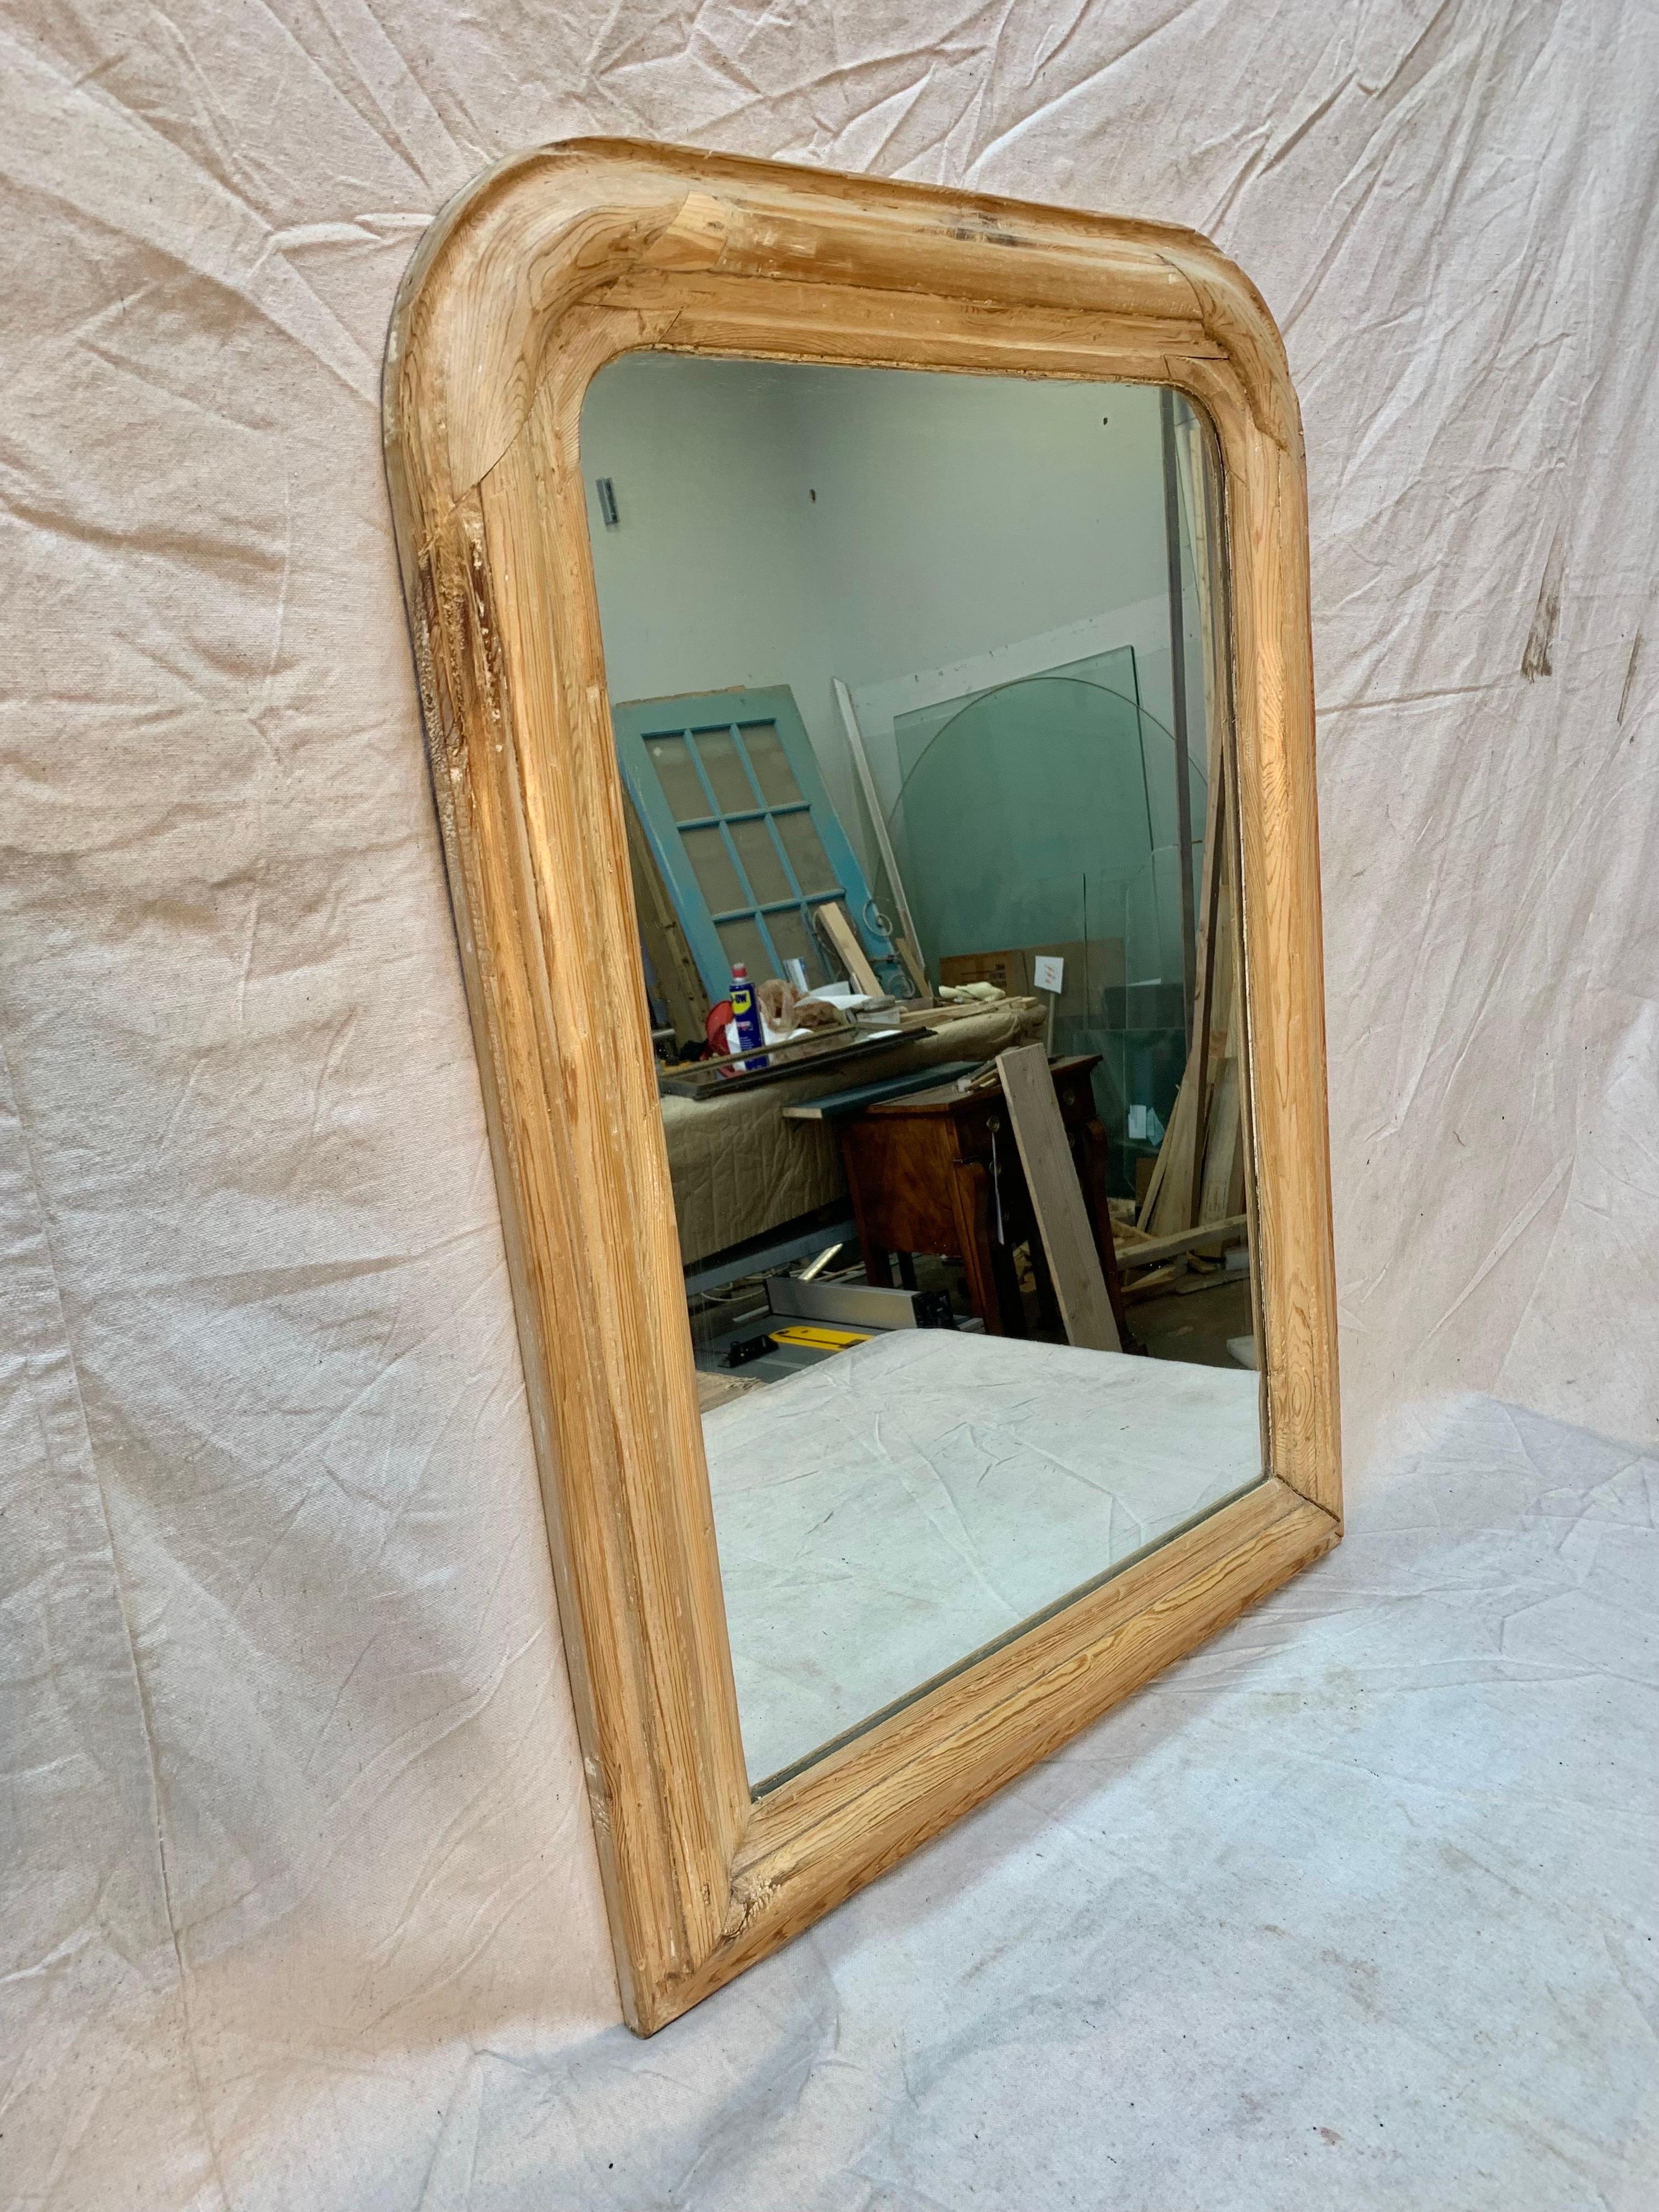 Found in the South of France this 19th Century French Louis Philippe Mirror features a beautiful  pine frame and its original mirrored glass.  Louis Phillipe mirrors are characterized by their curvaceous wide frames with rounded corners and